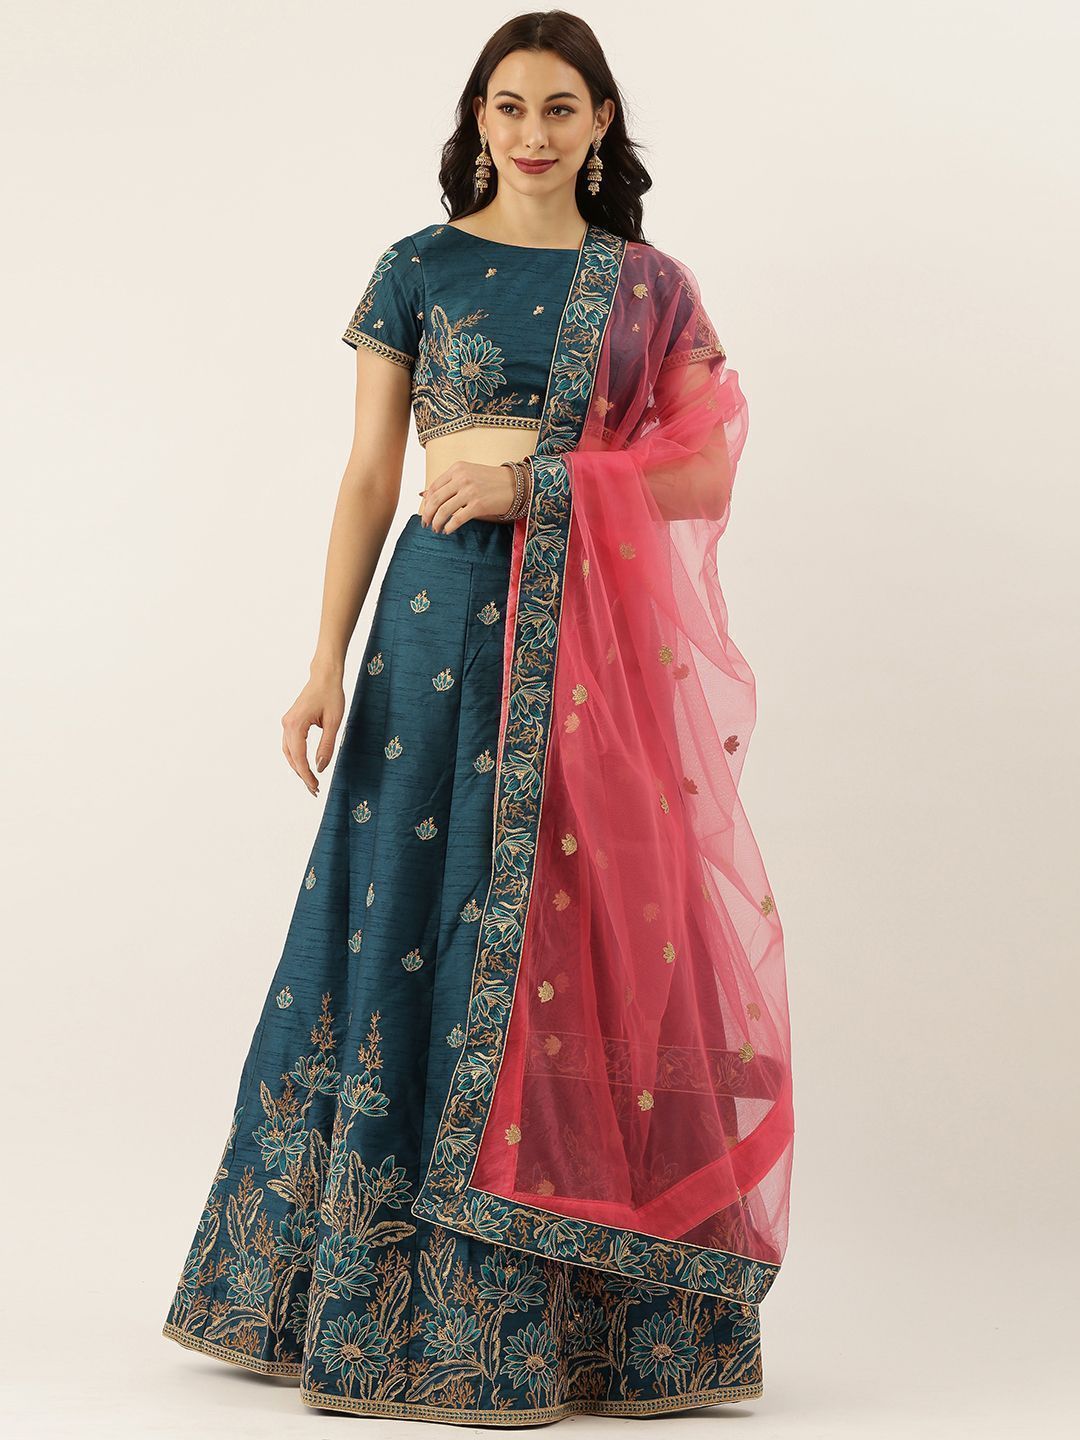 Teal & Gold-Toned Embroidered Semi-Stitched Myntra Lehenga & Unstitched Blouse with Dupatta